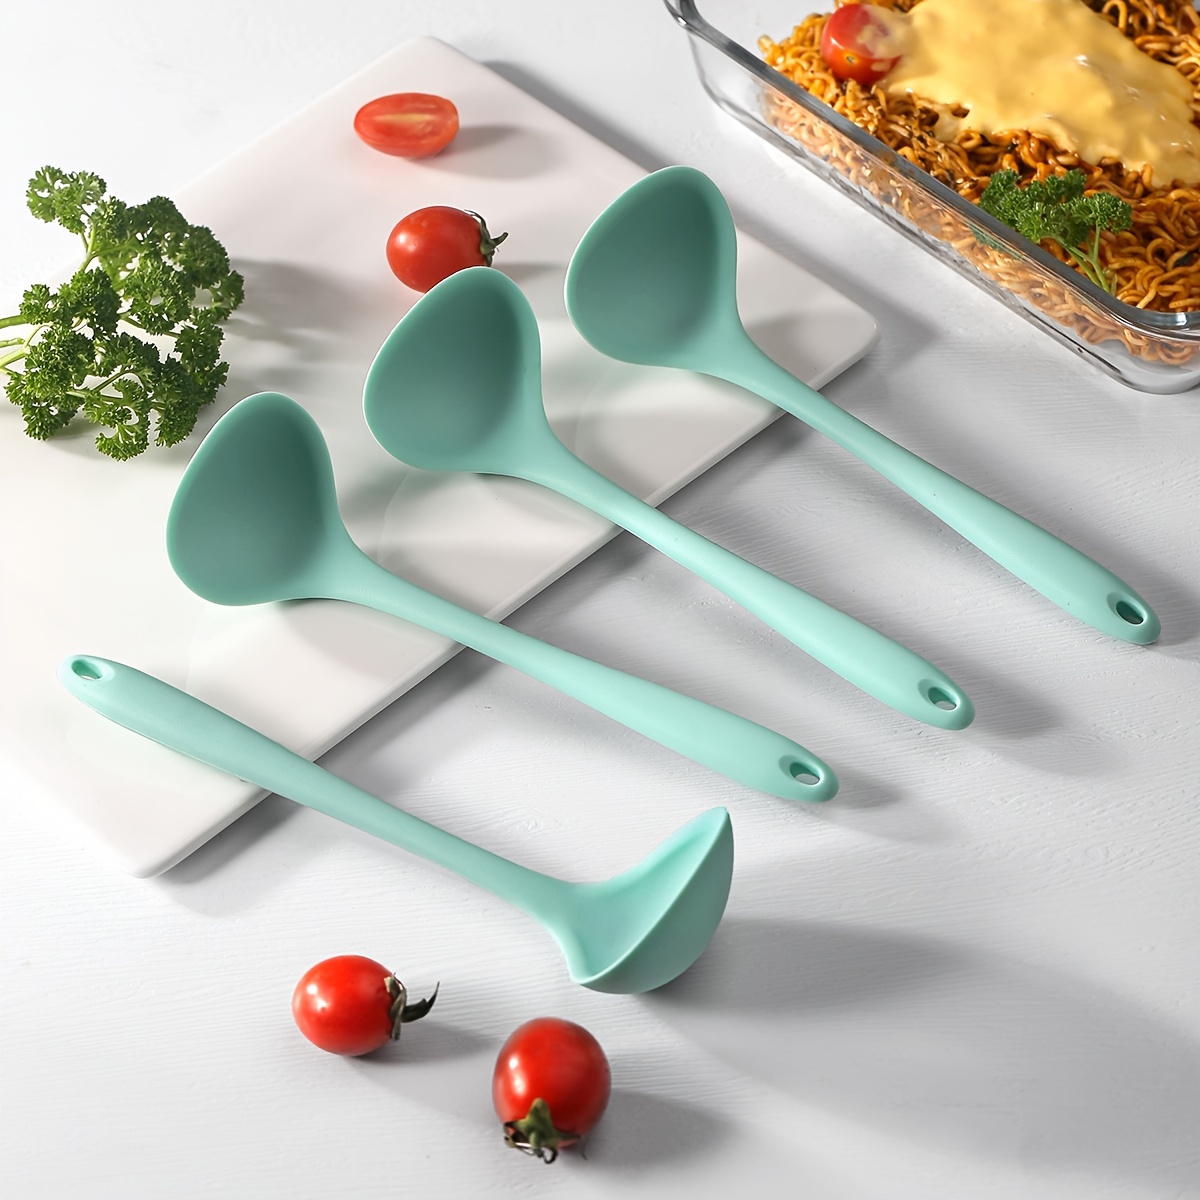 Small Silicone Ladle Spoon, High Heat Resistant Soup Ladle Scoop